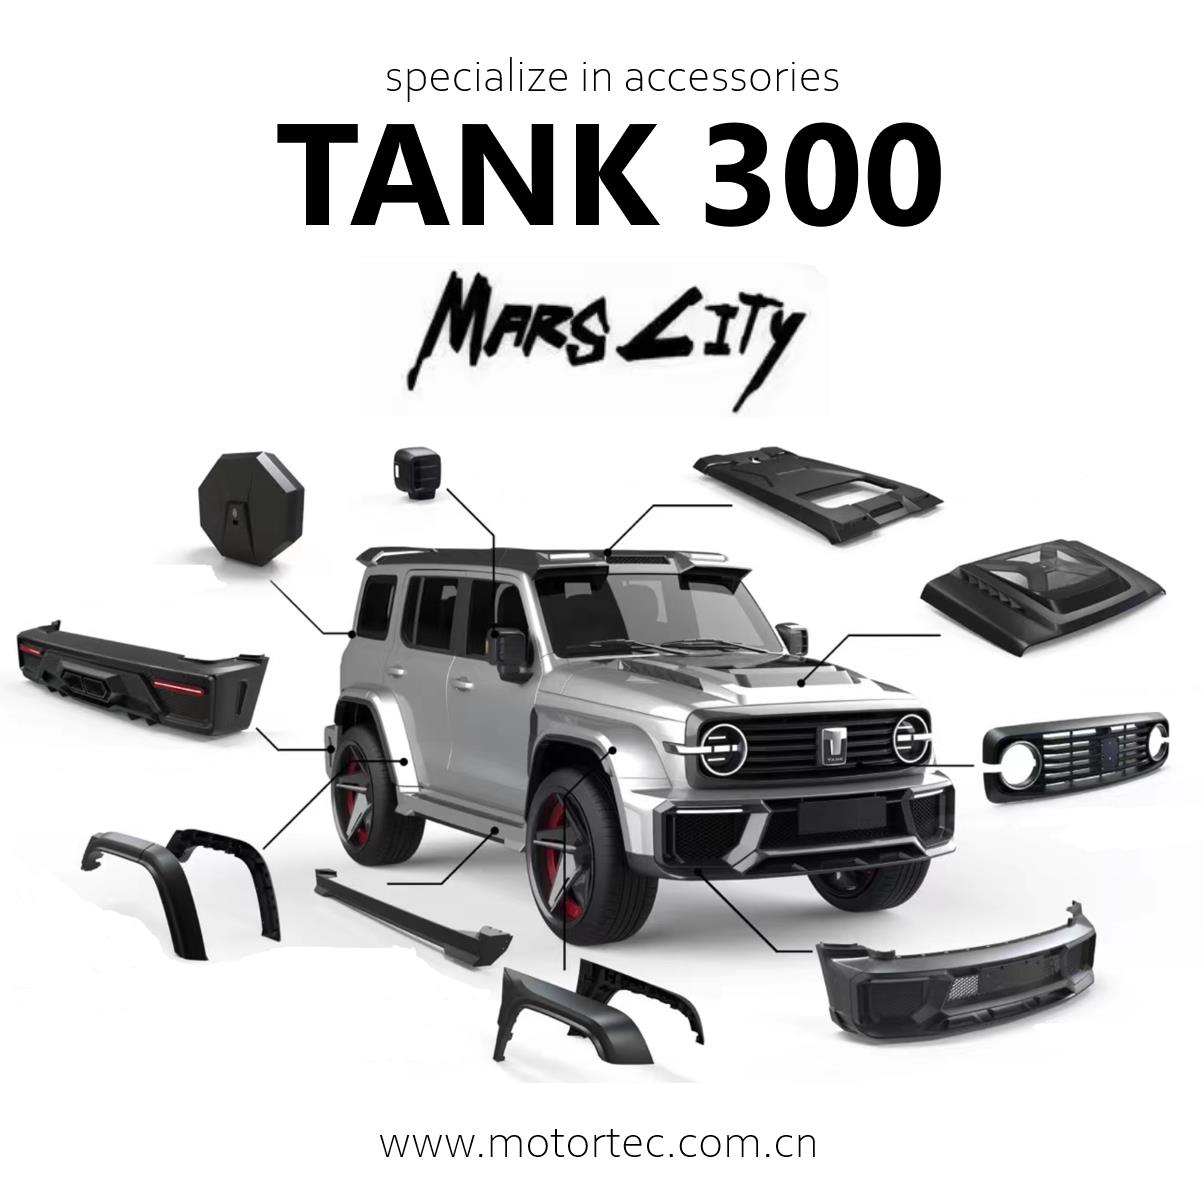 Body Upgarding Kits Mars City for GWM TANK 300 Accessories Factory Price China